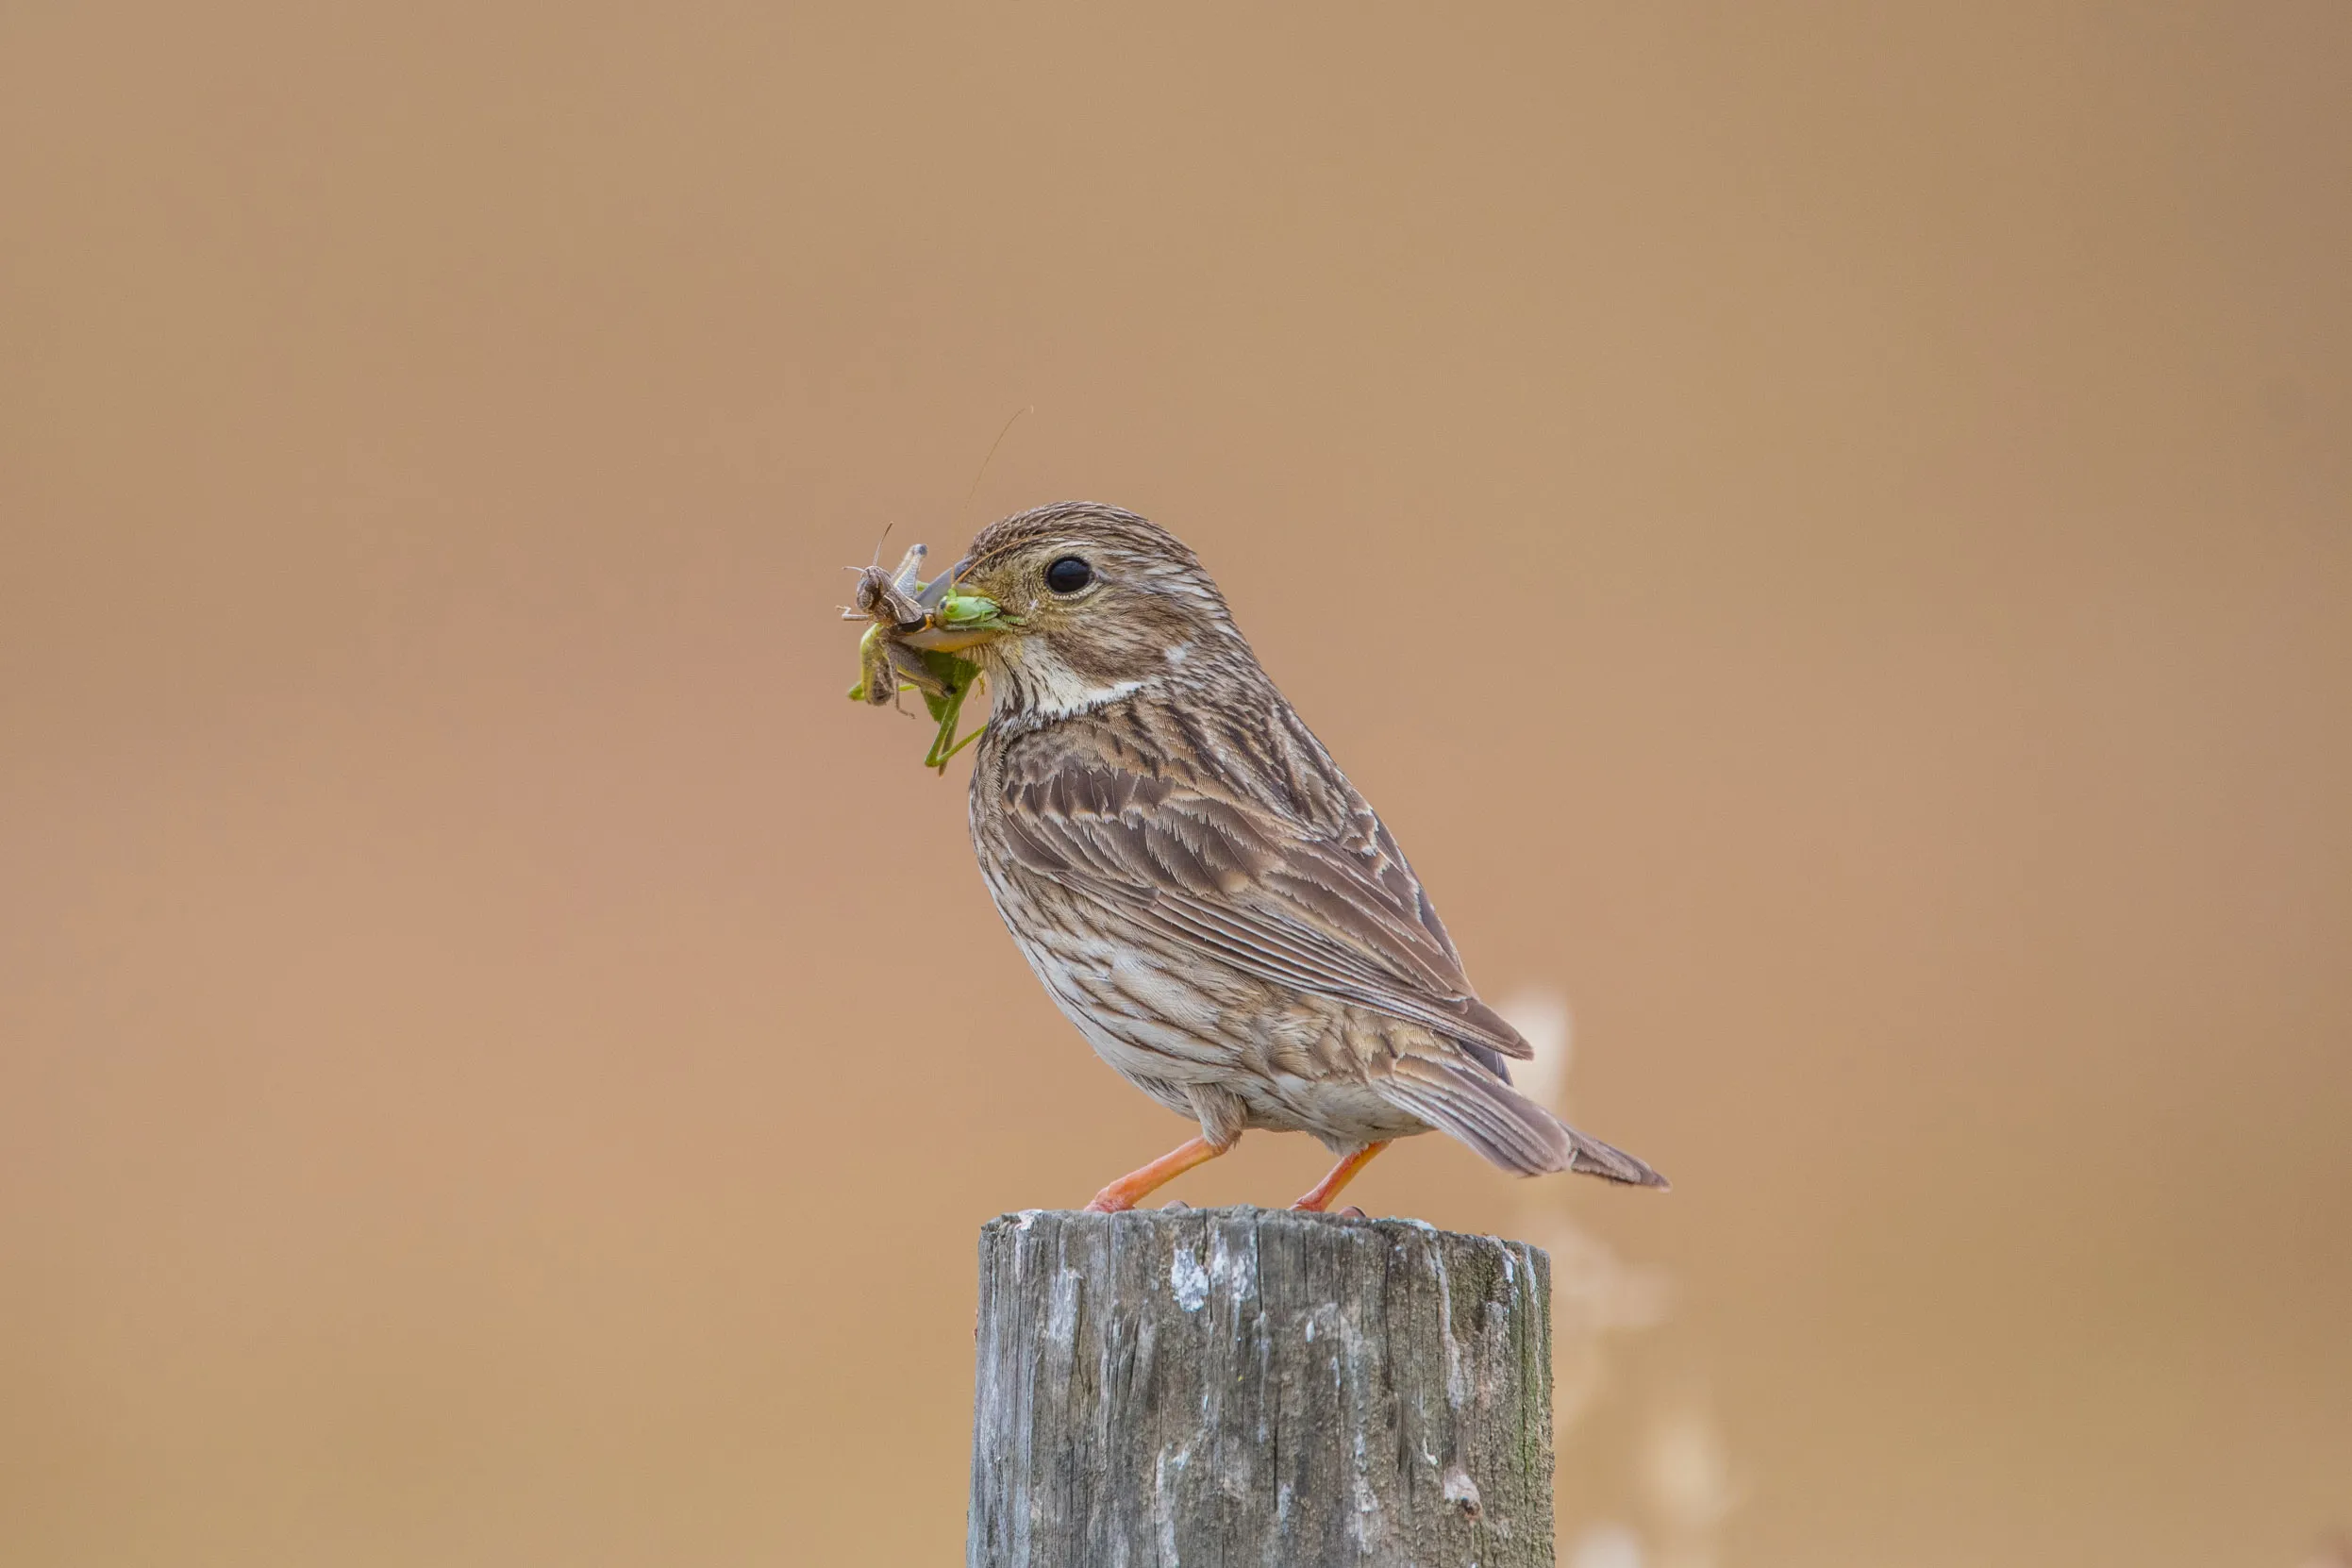 A Corn Bunting perched on top of a wooden post holding insects in their beak.